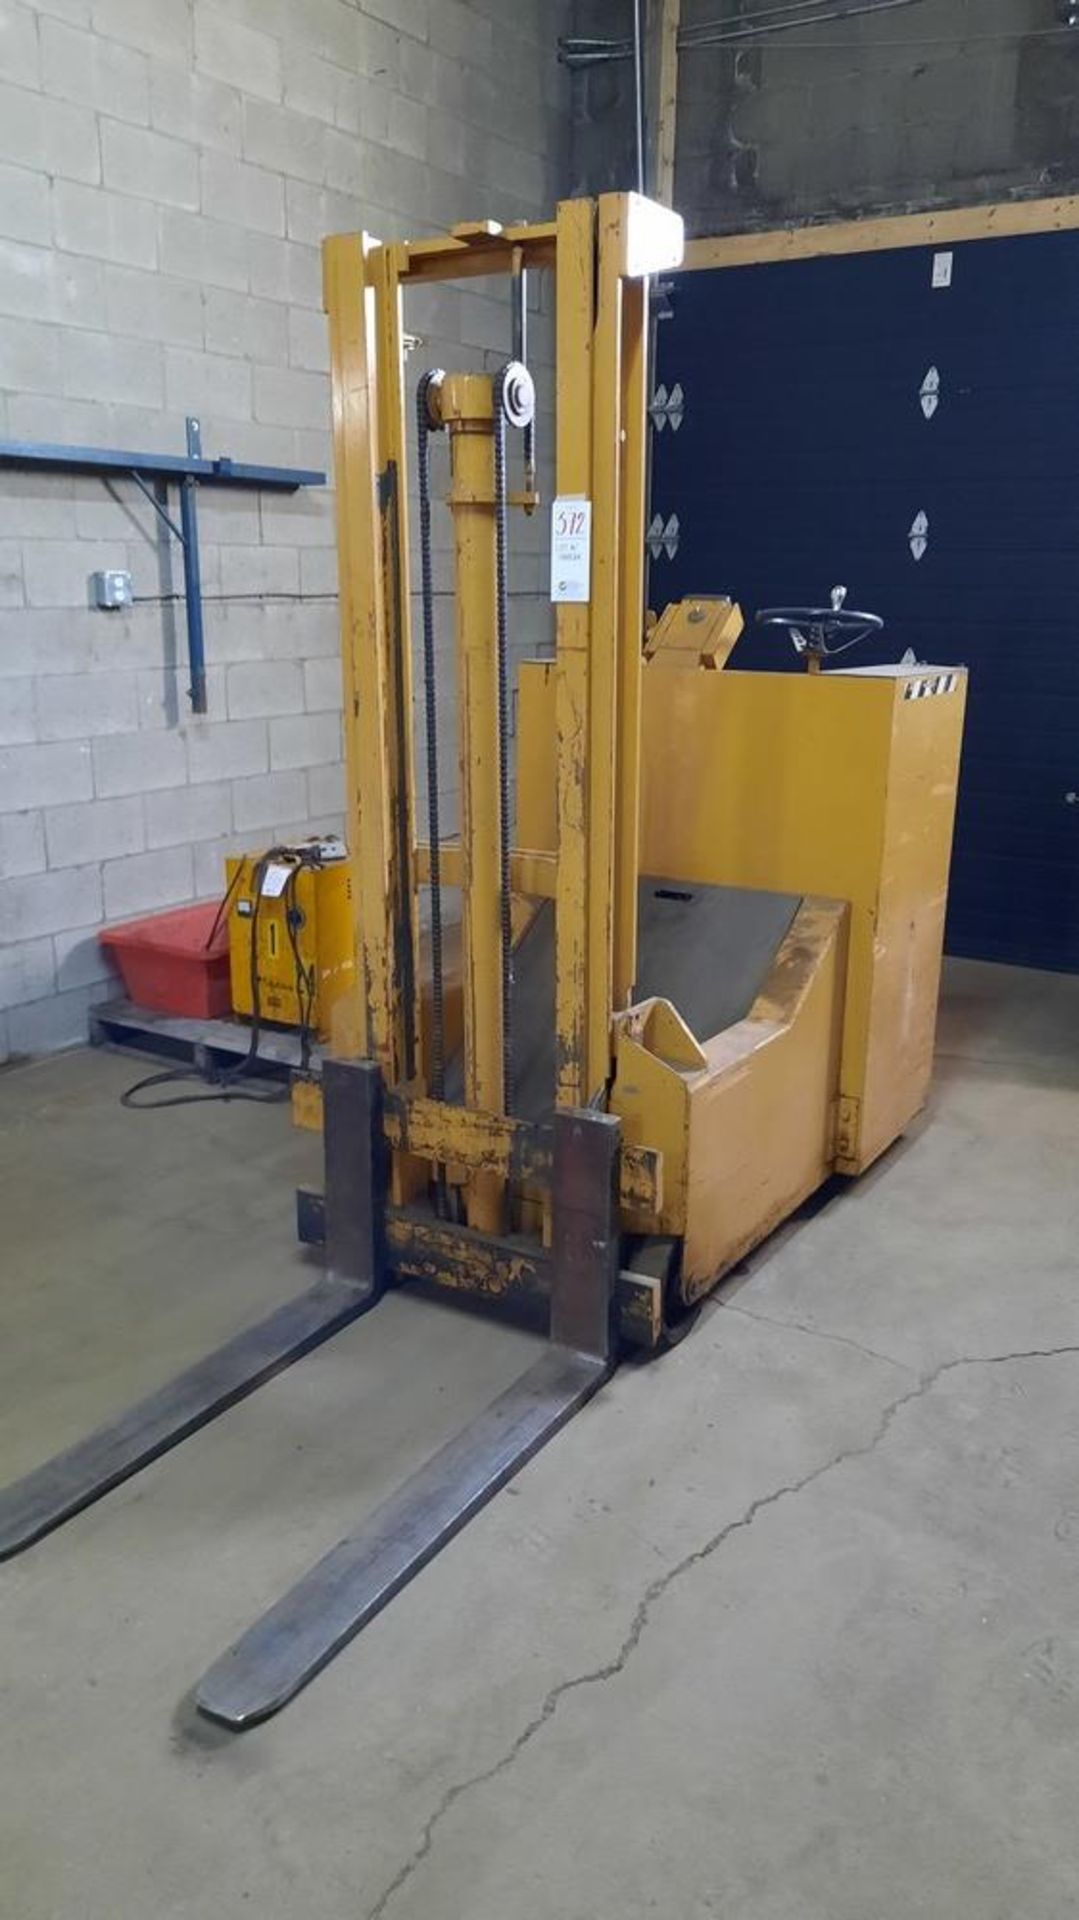 ATM Electric Lift, c/w VULCAN Charger (see data plates for details)